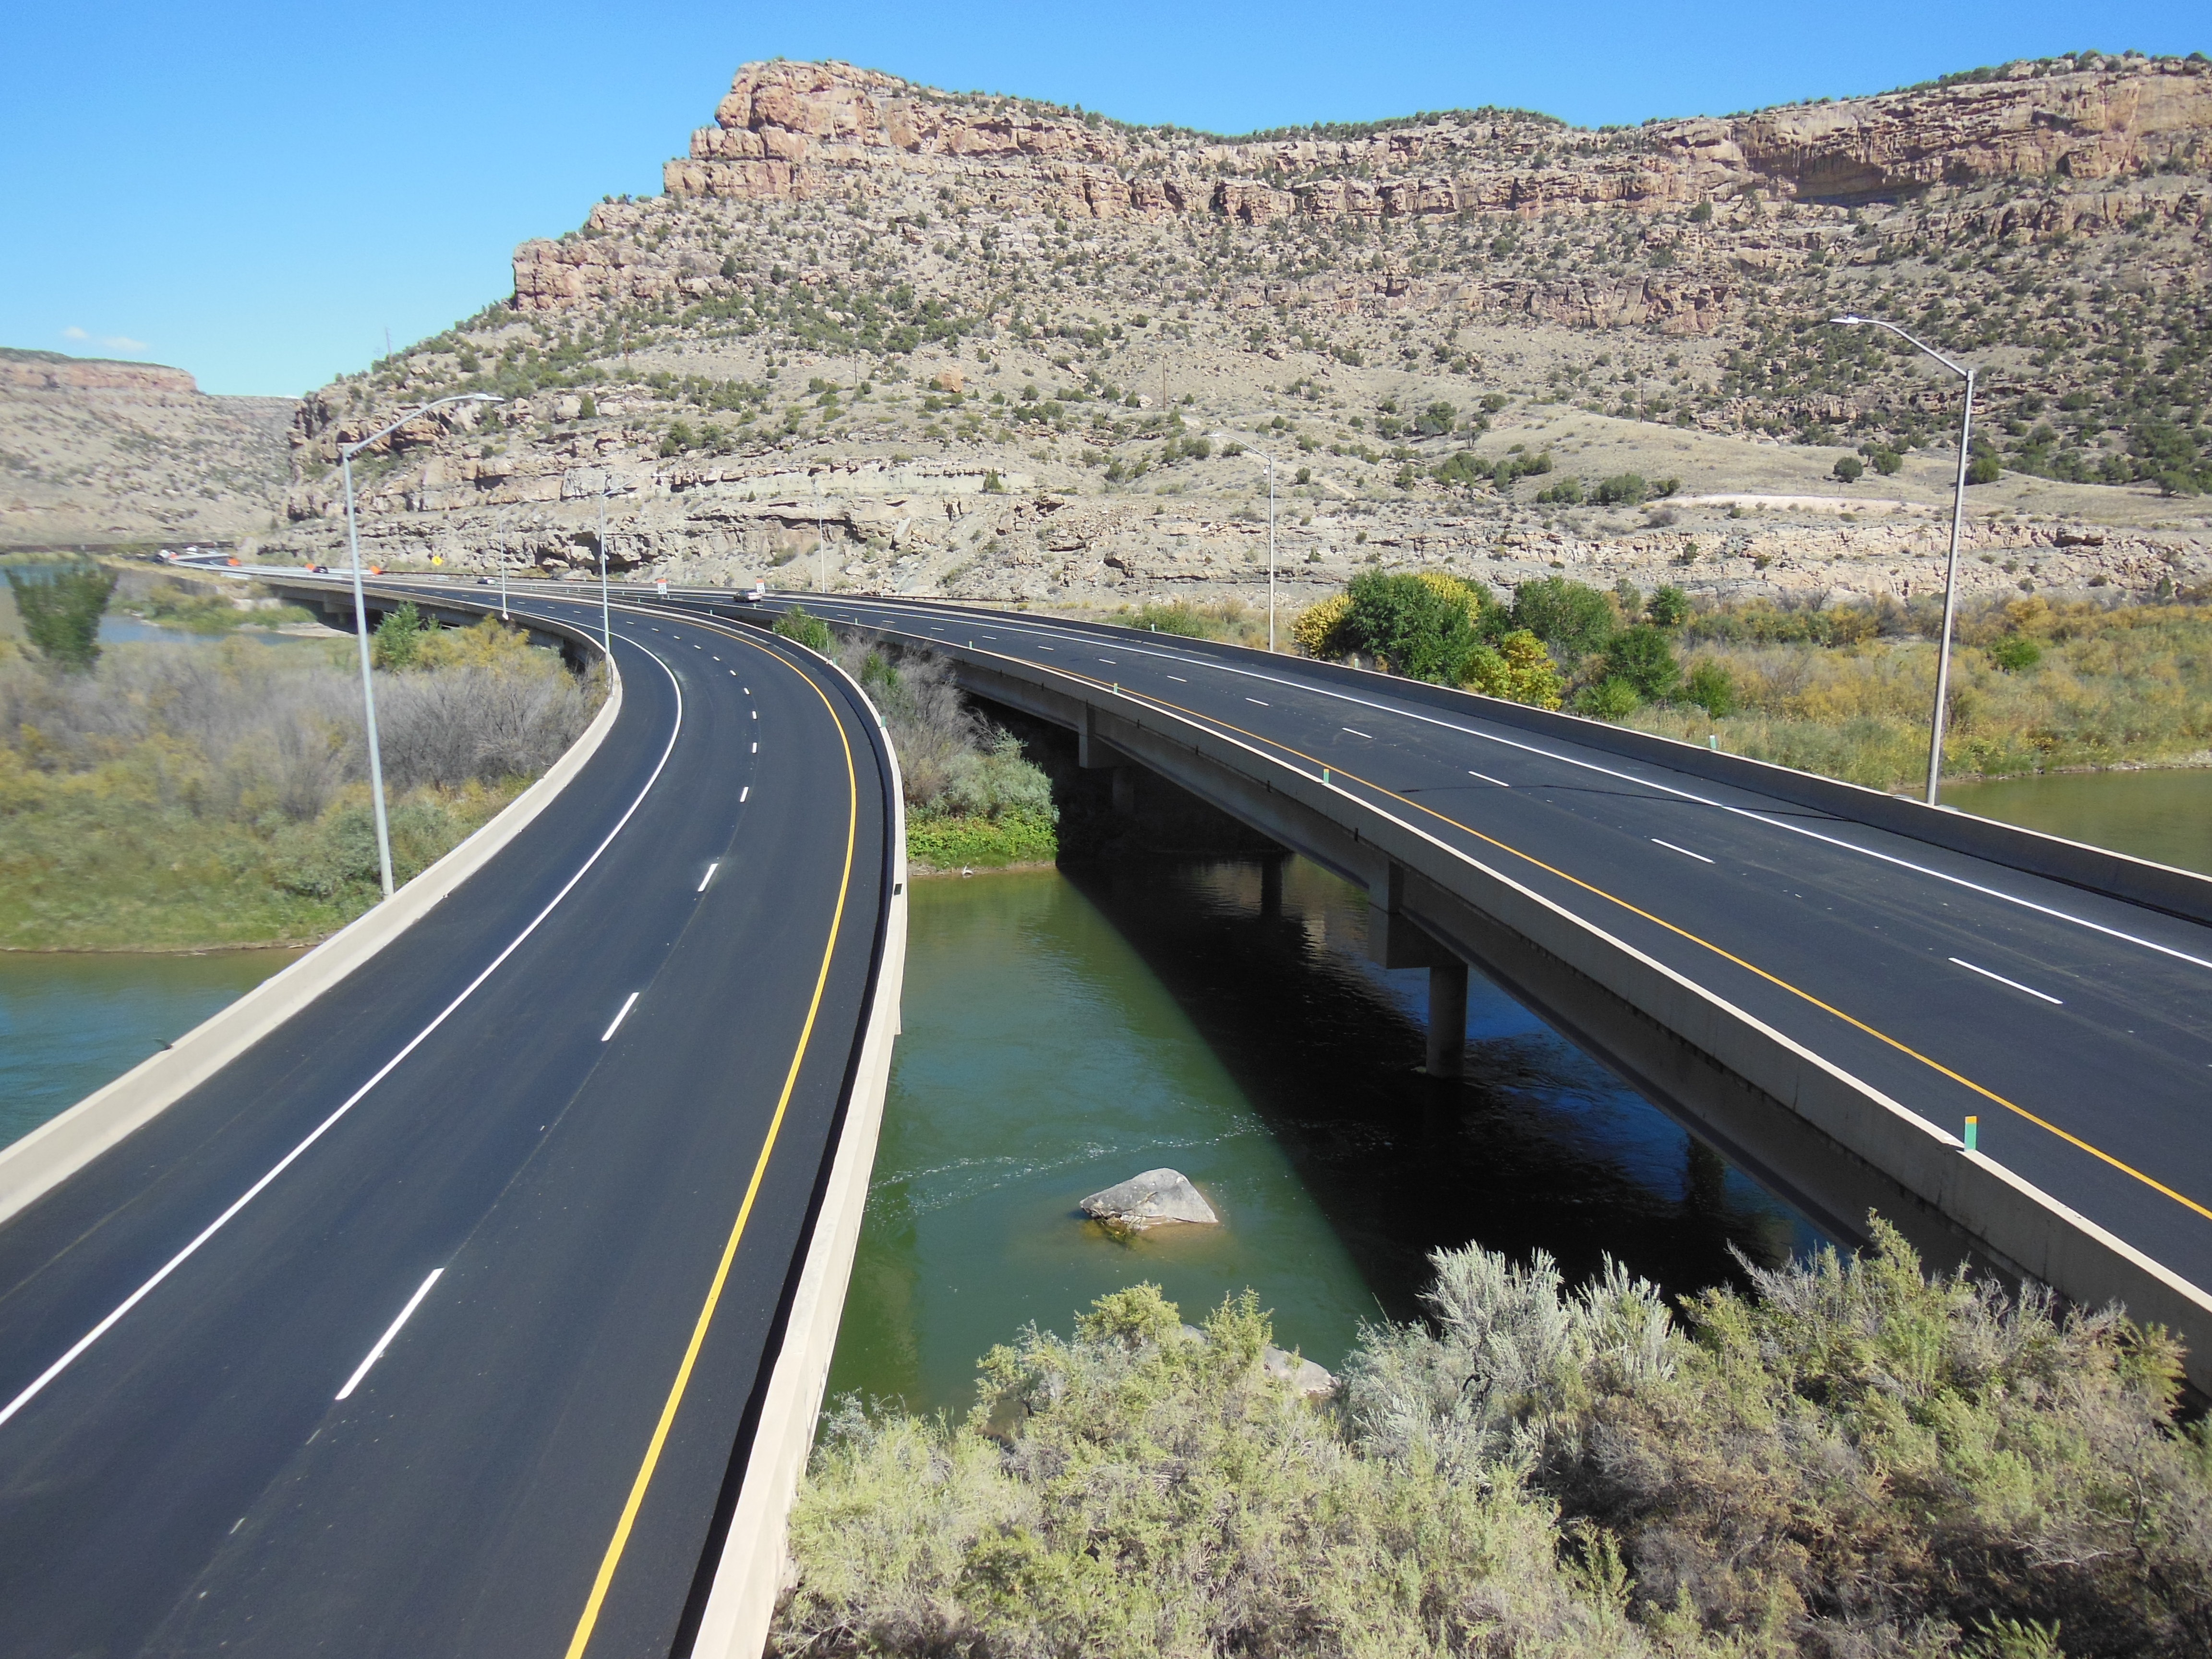 Elam Construction, Inc., of Grand Junction, Colorado, took home a QIC award for its Exit 49 resurfacing project on I-70. Photo courtesy Elam Construction.